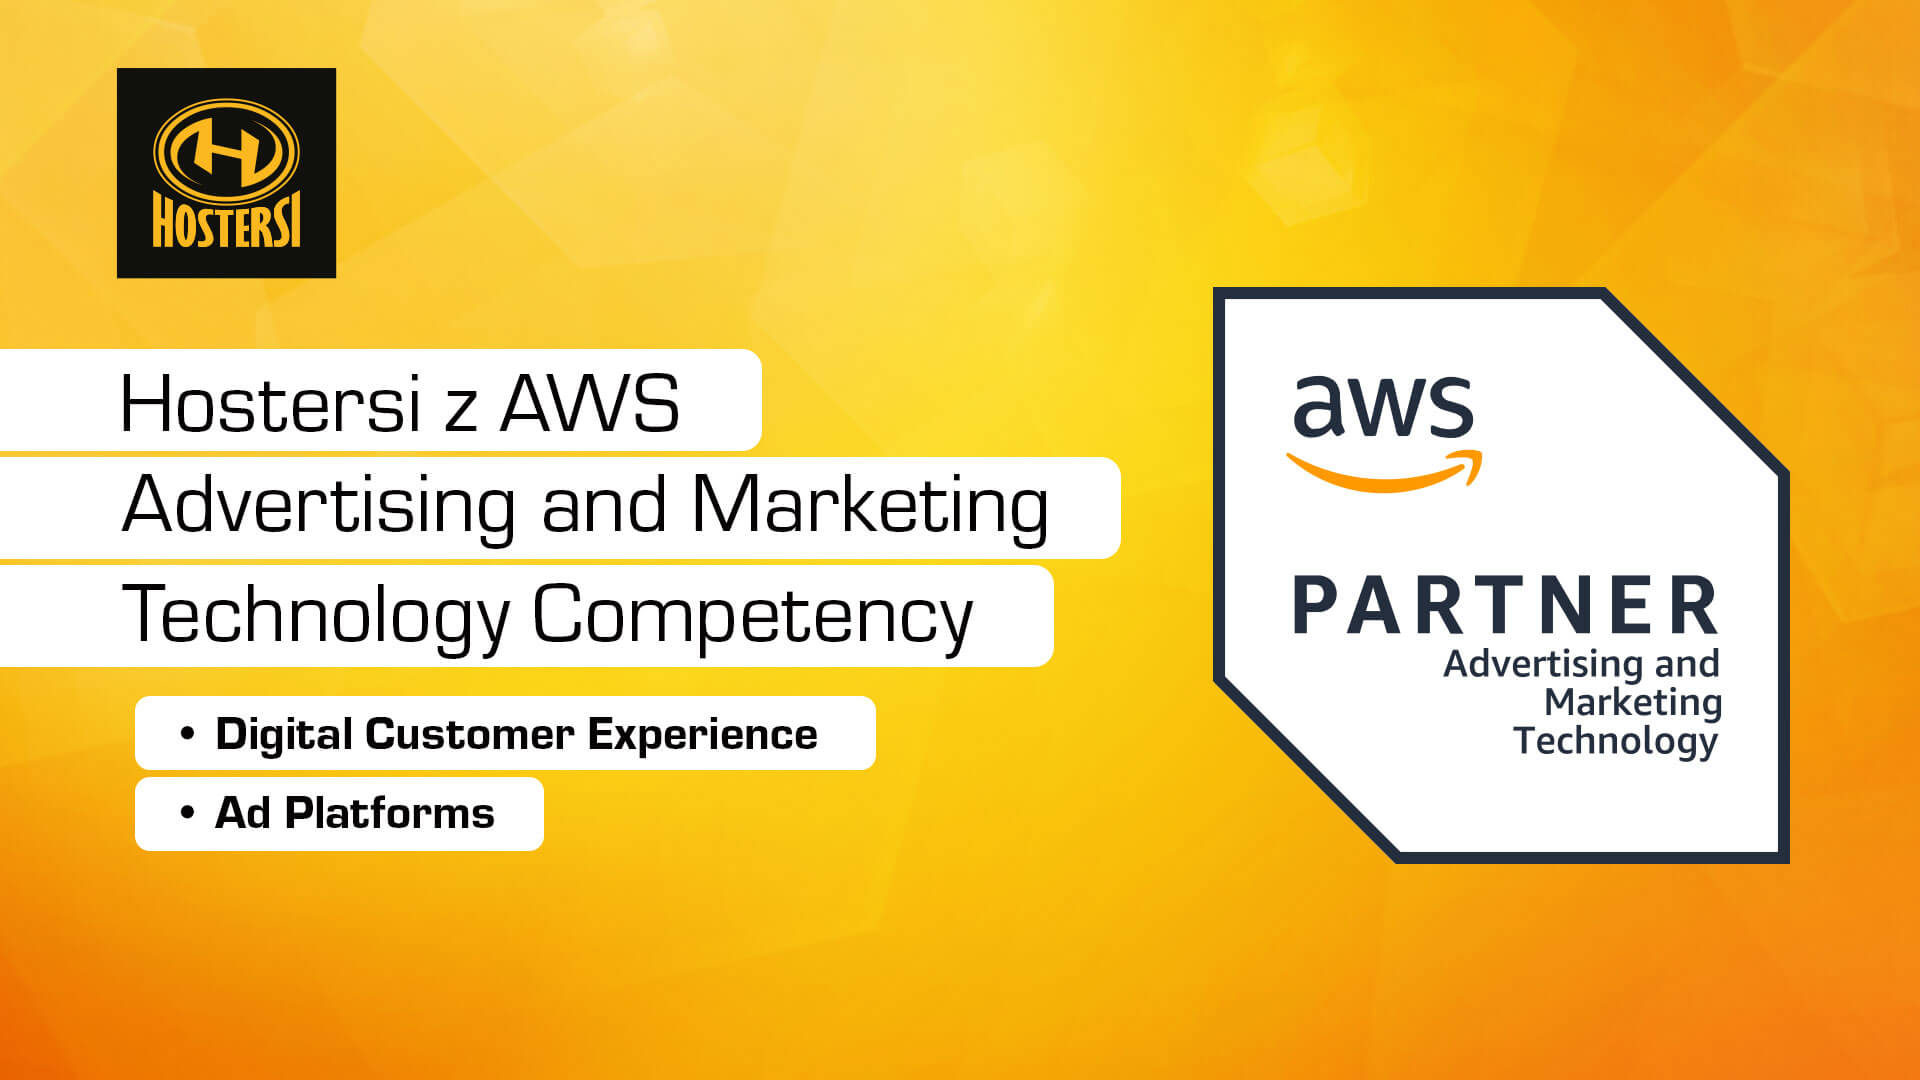 Hostersi z AWS Advertising and Marketing Technology Competency